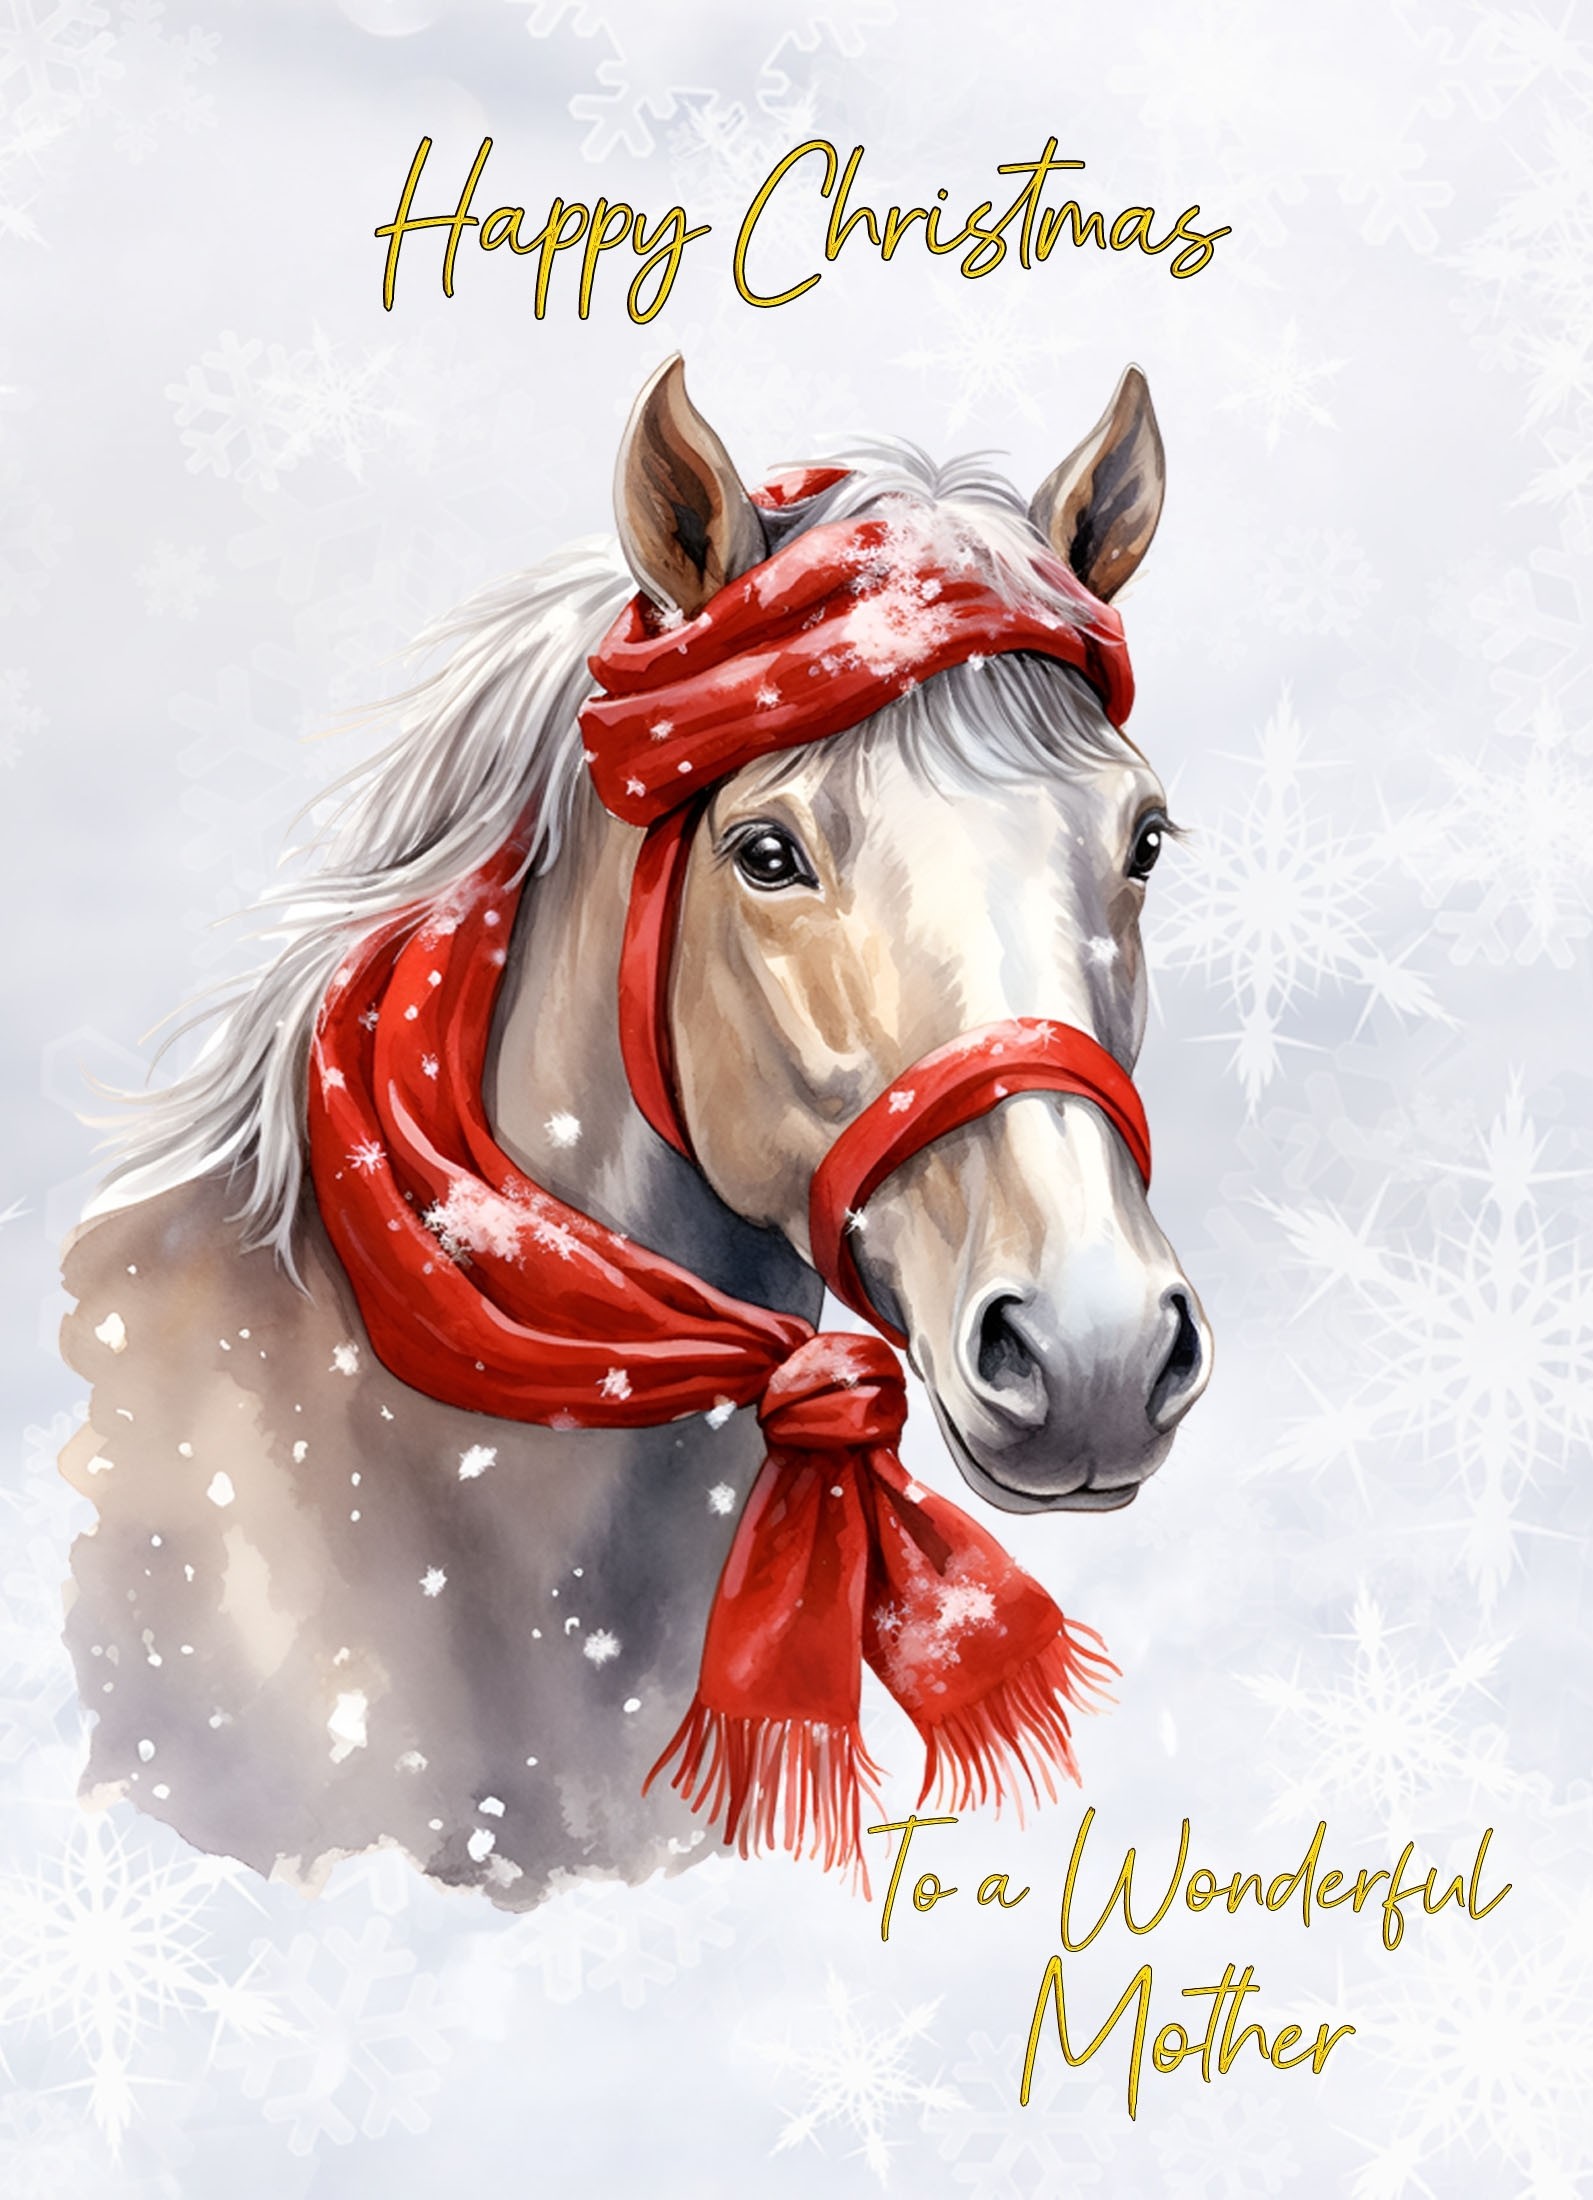 Christmas Card For Mother (Horse Art Red)